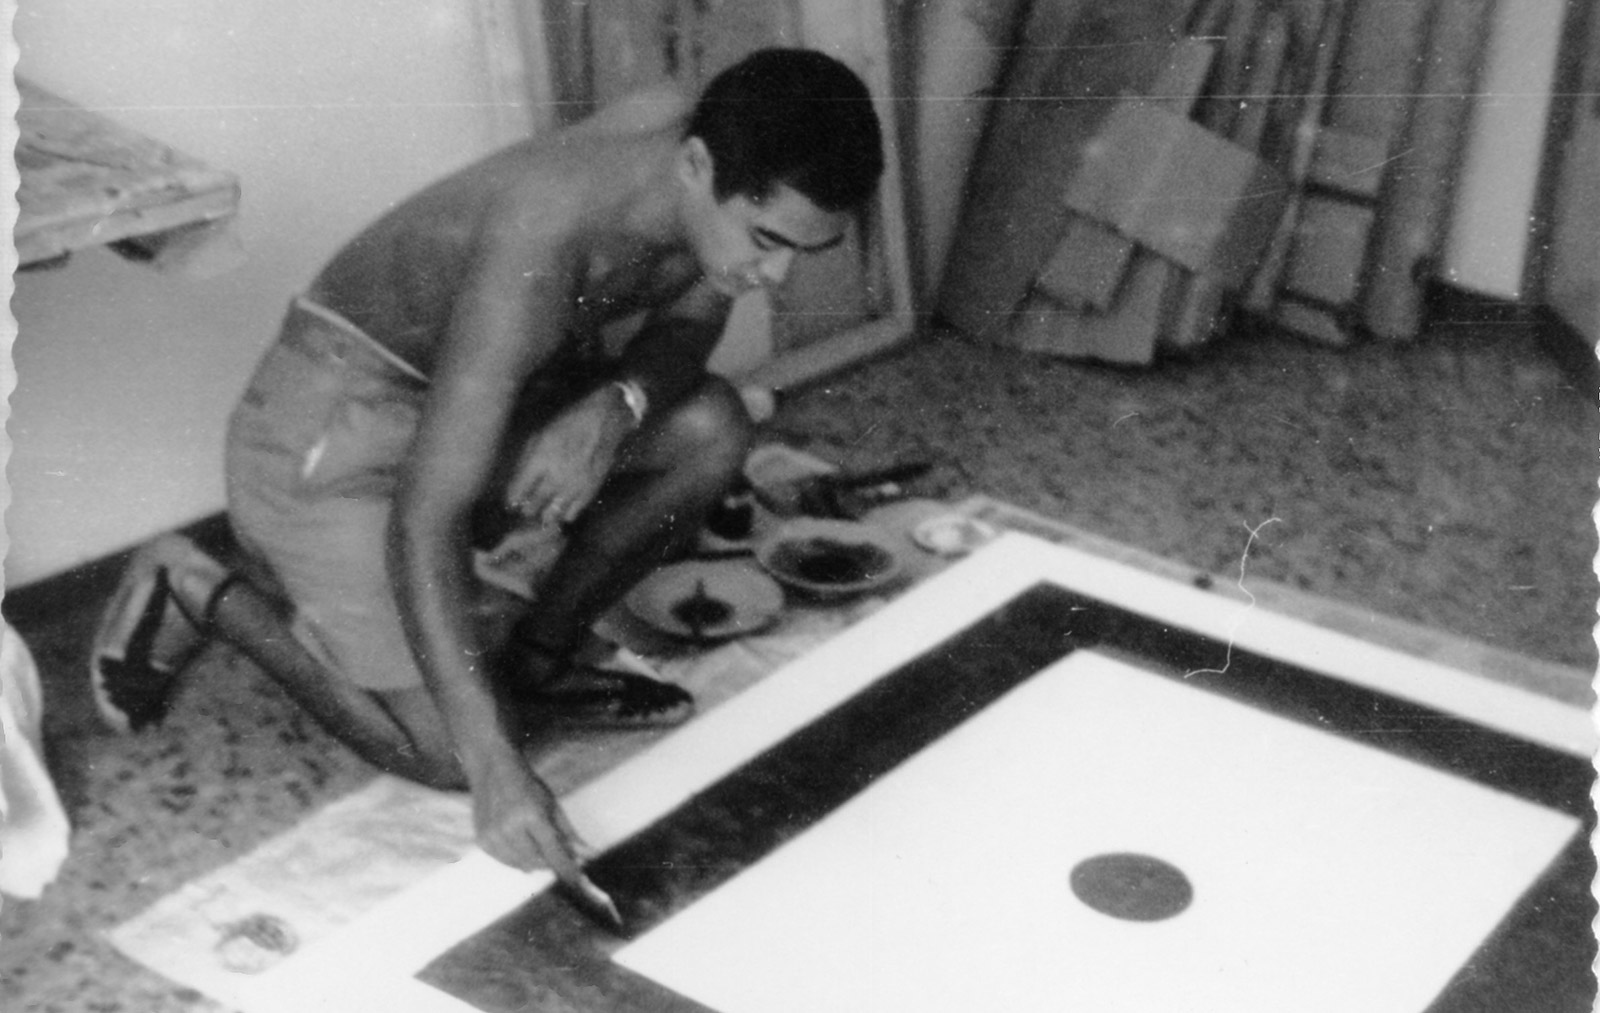 Hsiao-Chin-painting-Tao-in-his-studio-in-Milan-1962